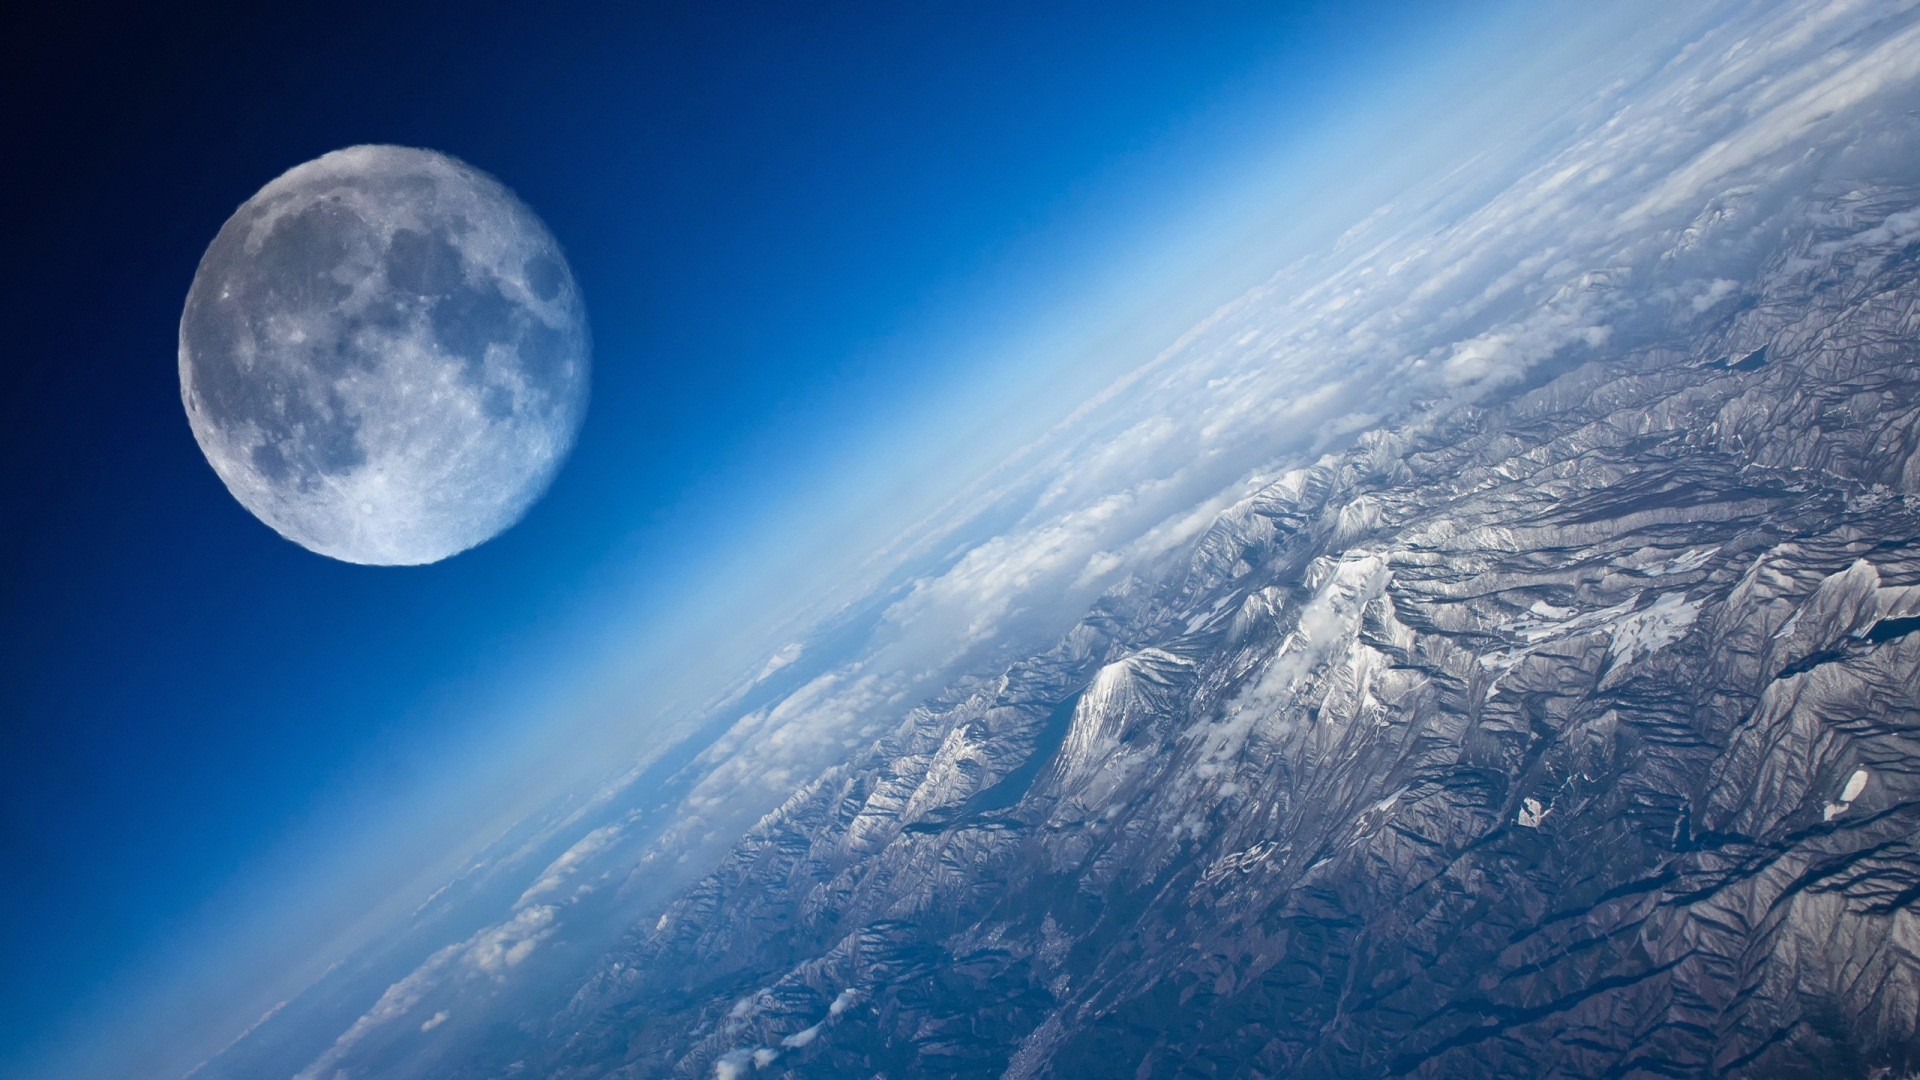 Moon Aerial Landscape Mountains wallpaper background